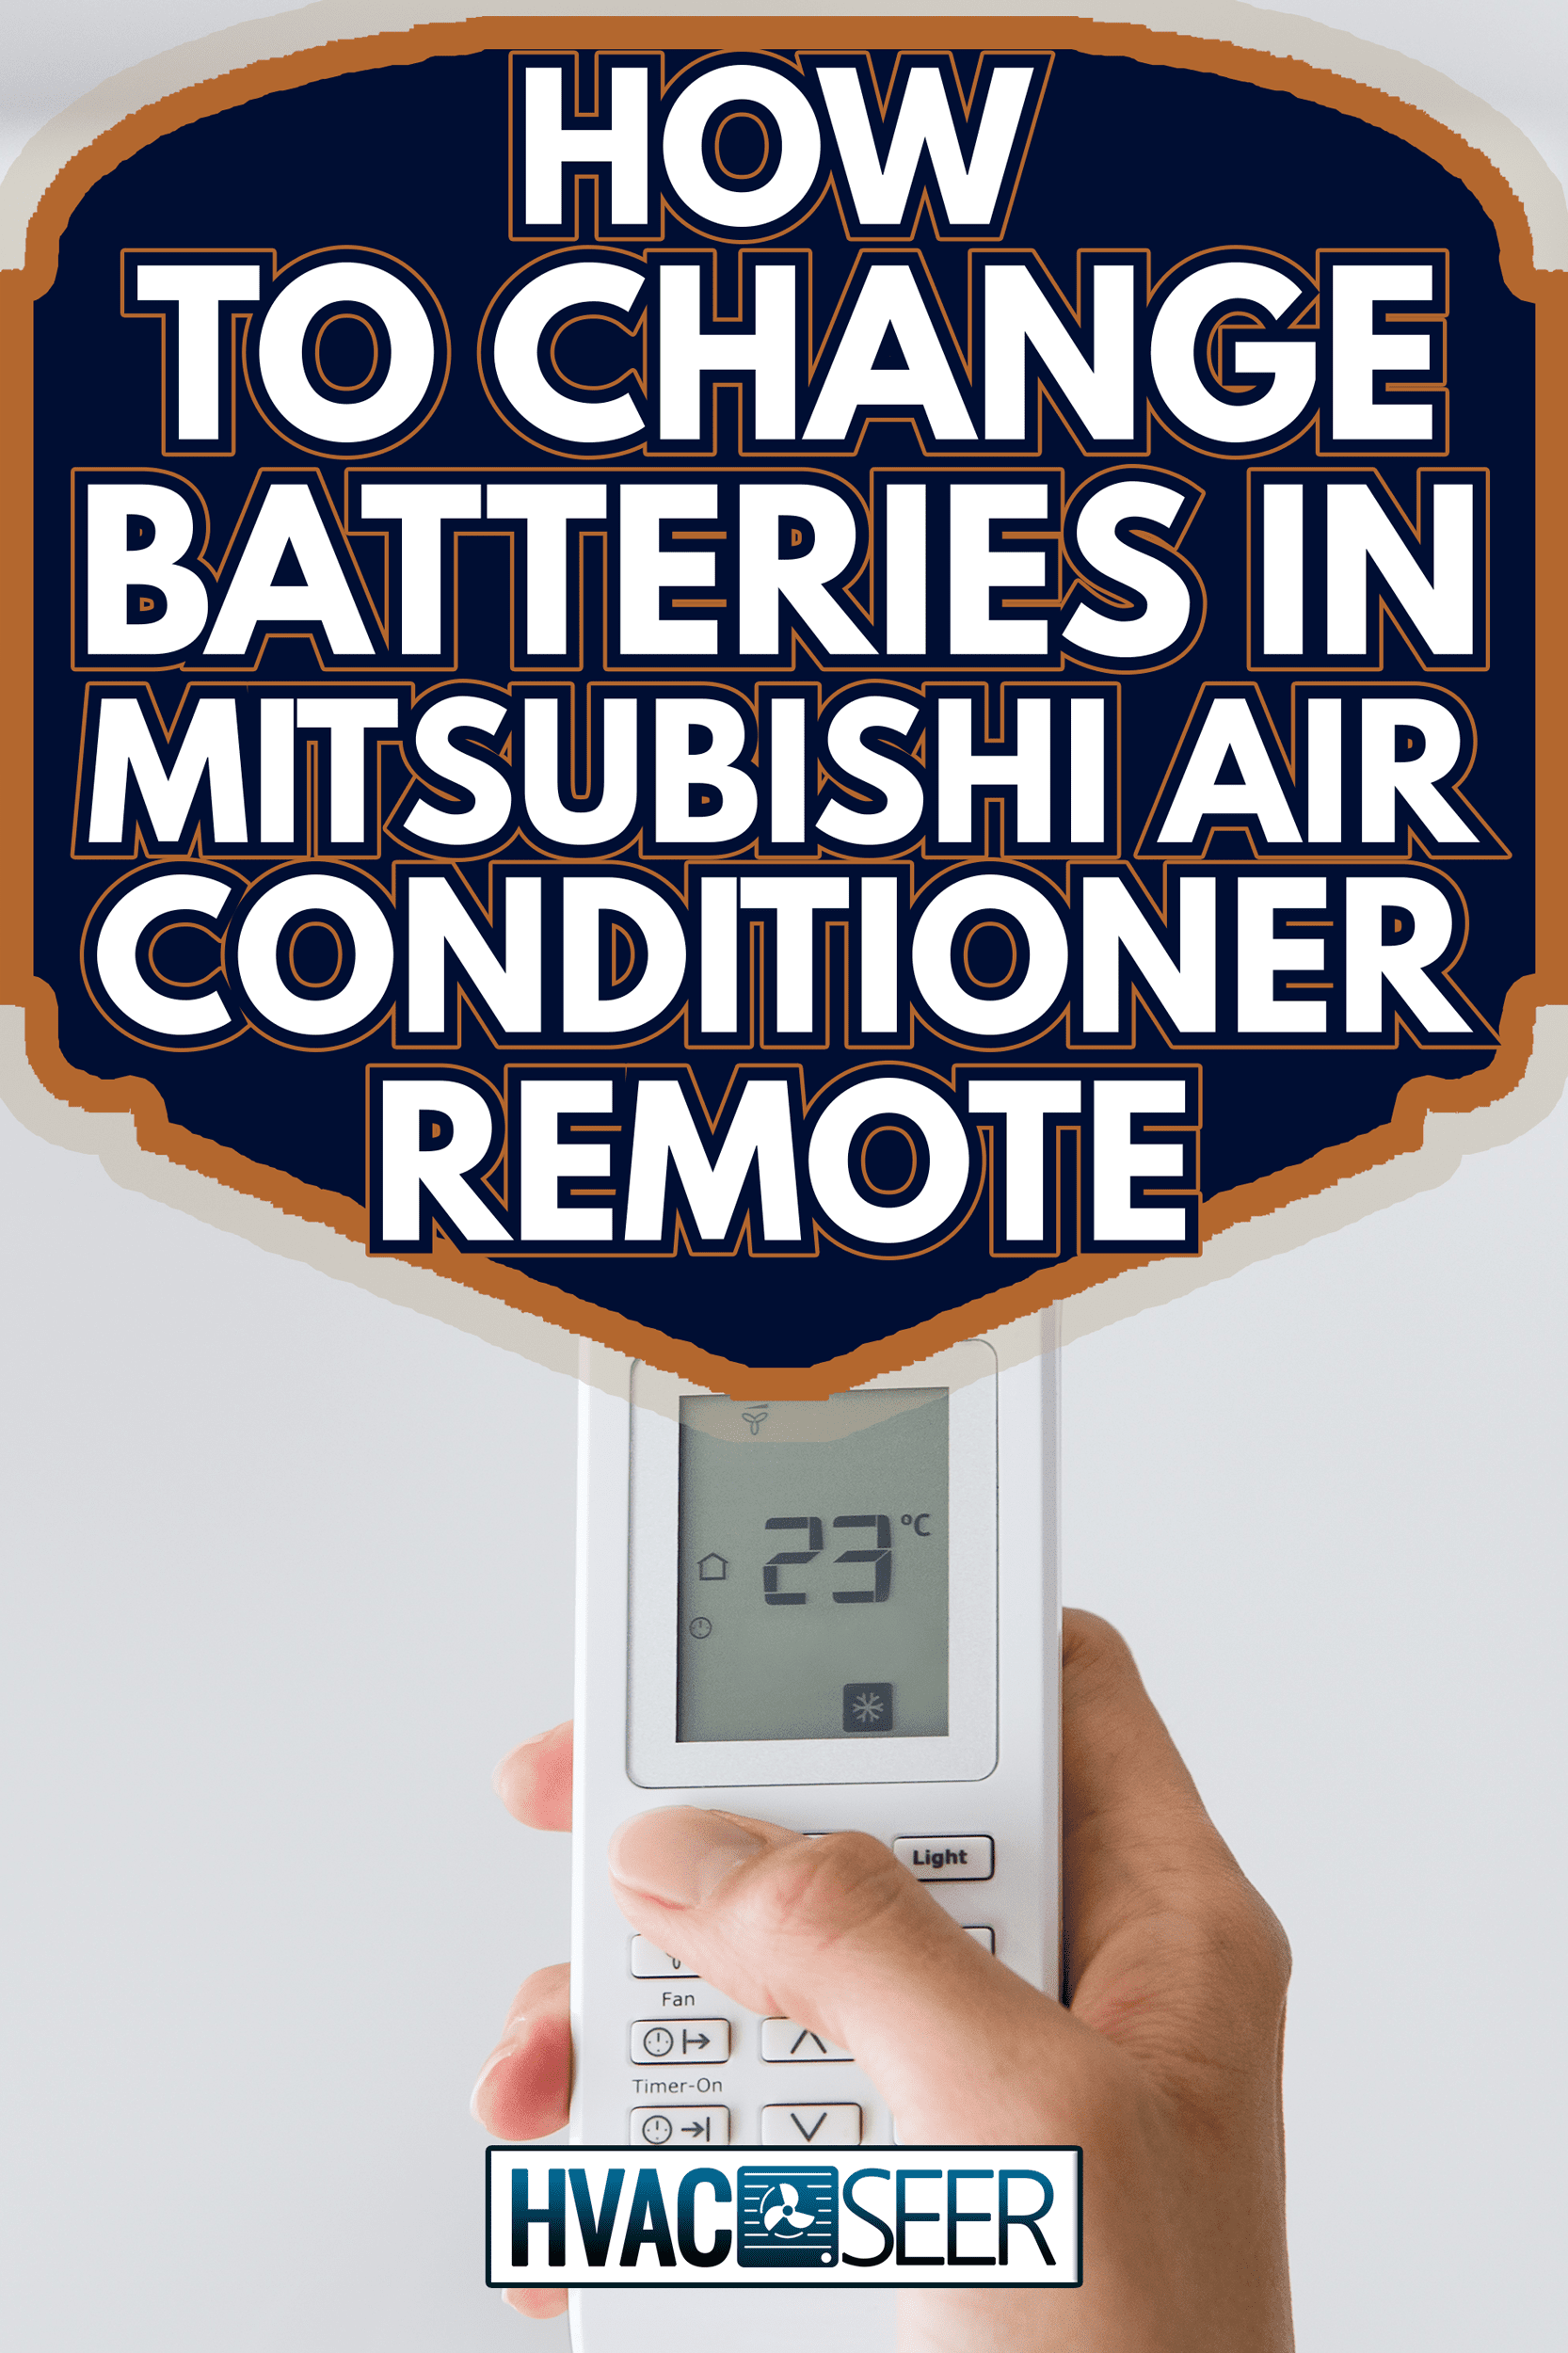 Split air conditioner on a white wall - How To Change Batteries In Mitsubishi Air Conditioner Remote